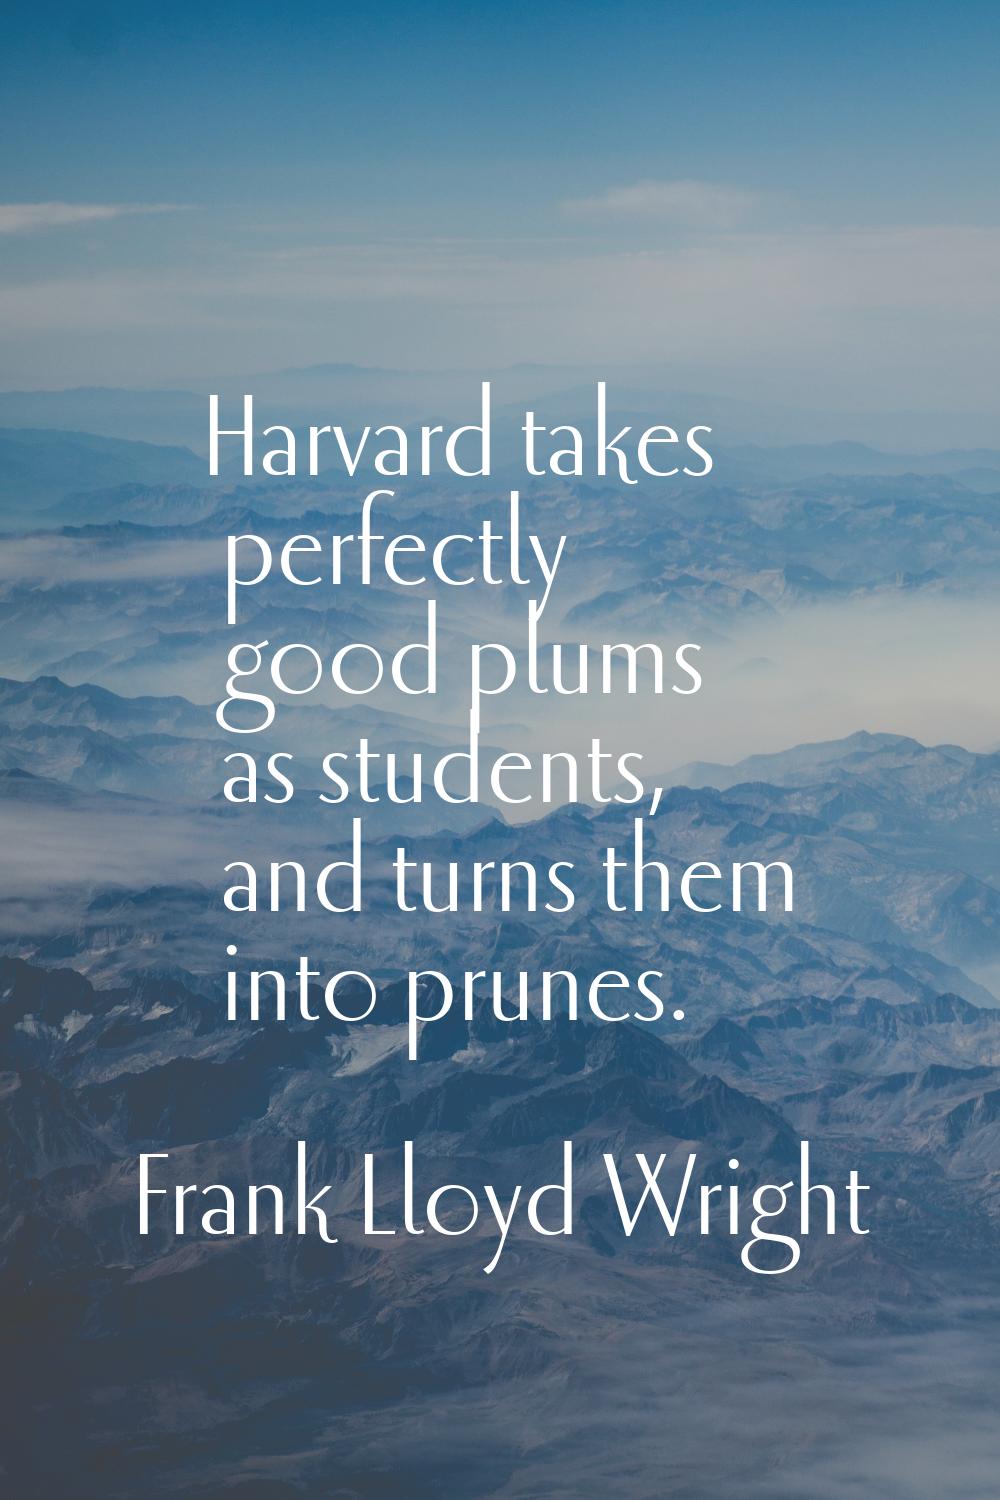 Harvard takes perfectly good plums as students, and turns them into prunes.